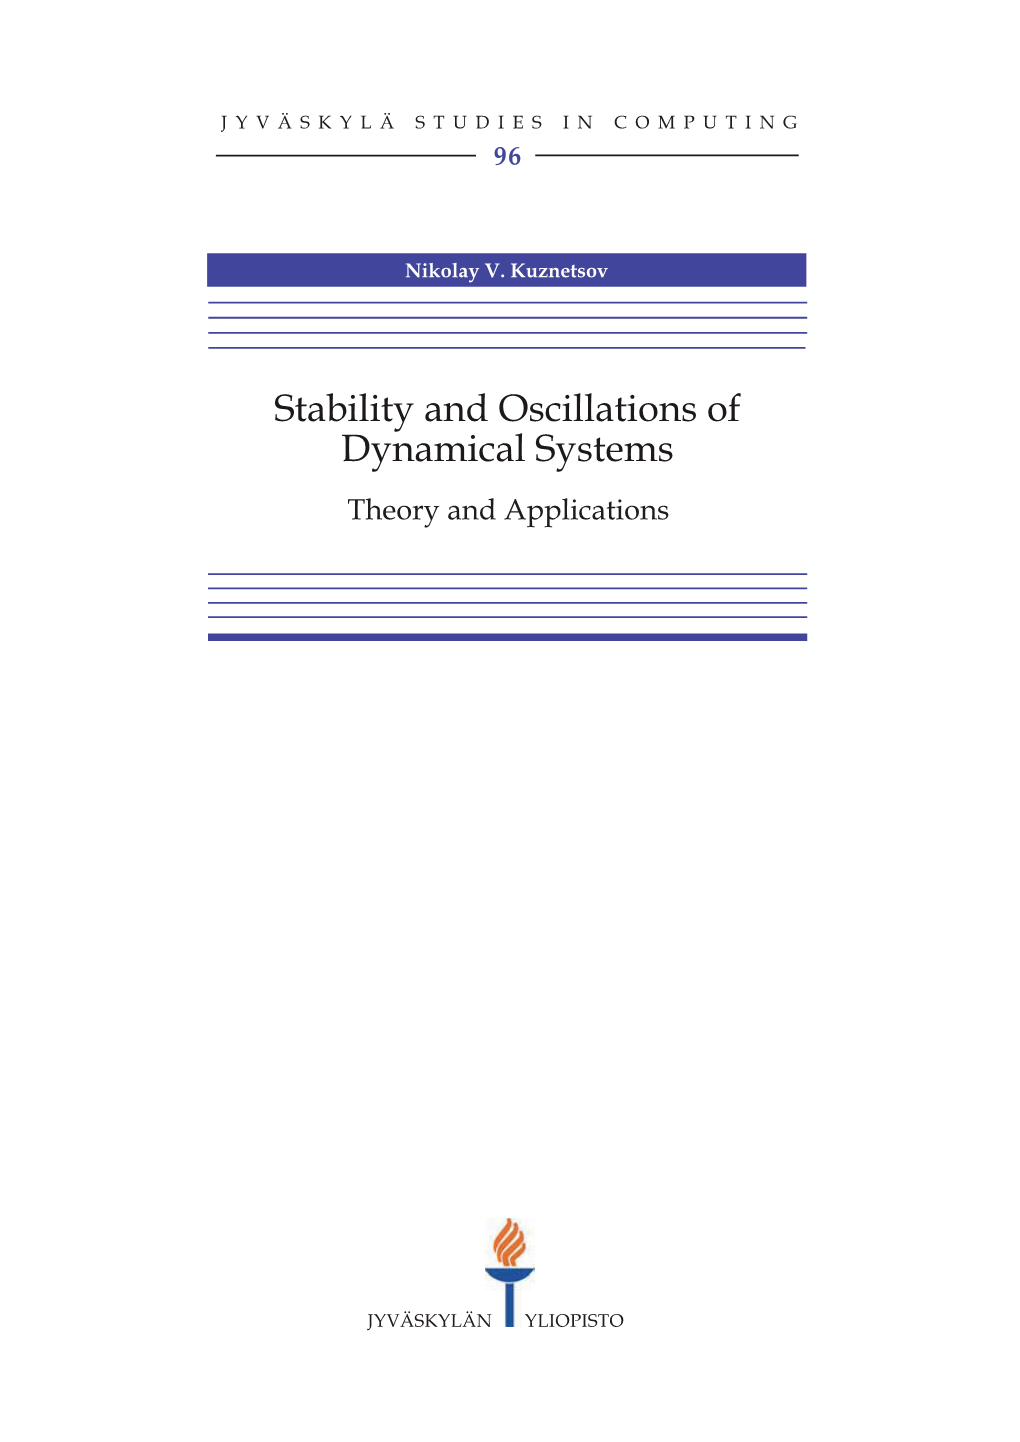 Stability and Oscillations of Dynamical Systems Theory and Applications